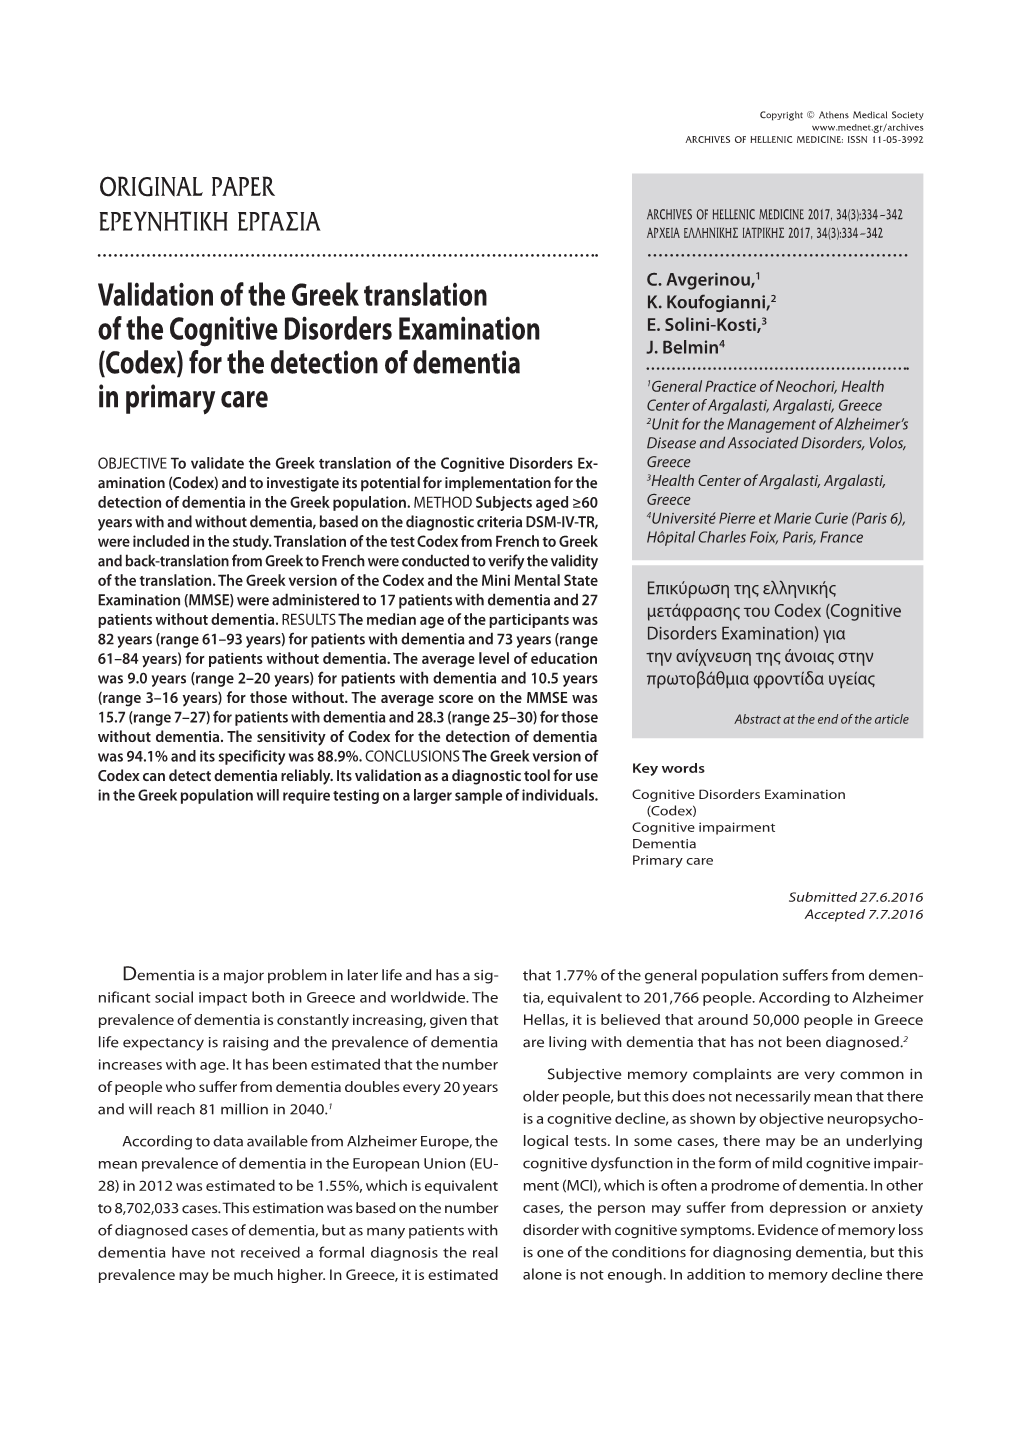 Validation of the Greek Translation of the Cognitive Disorders Examination